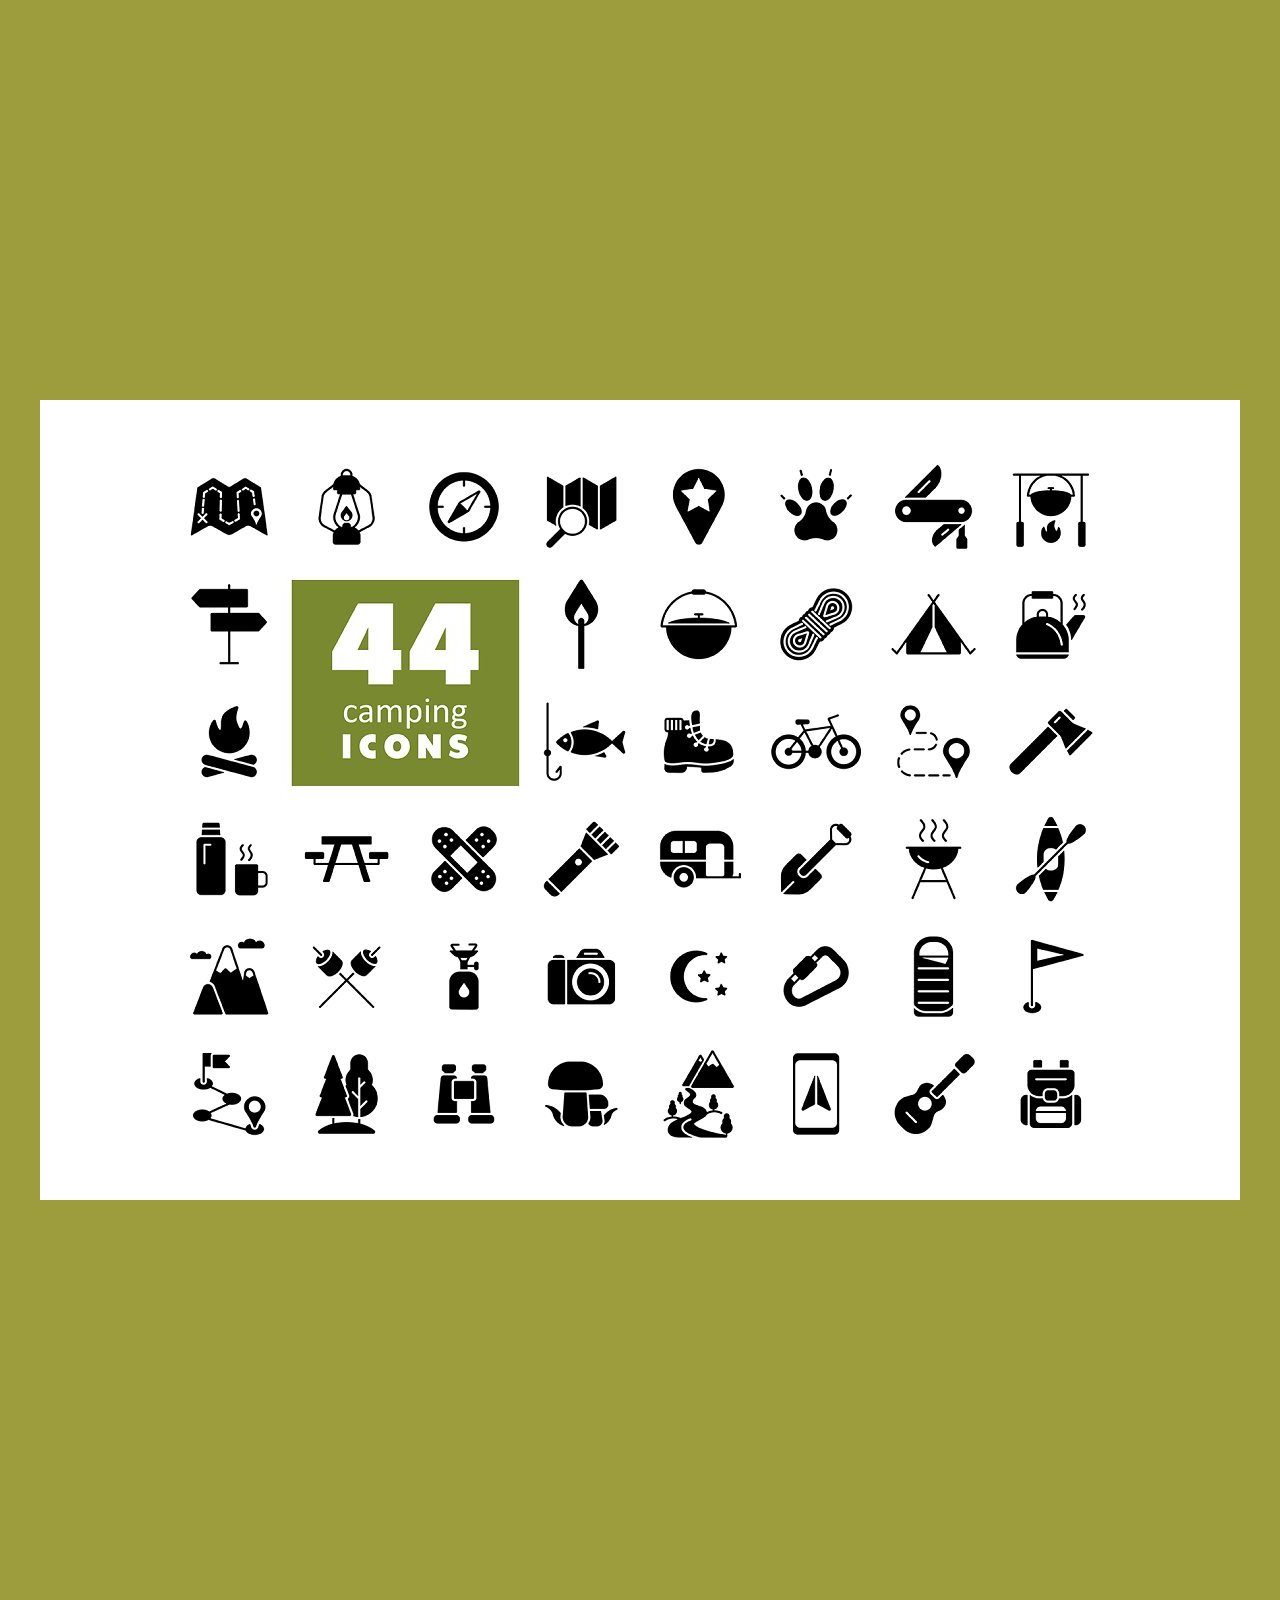 44 camping hiking vector icons pinterest image.